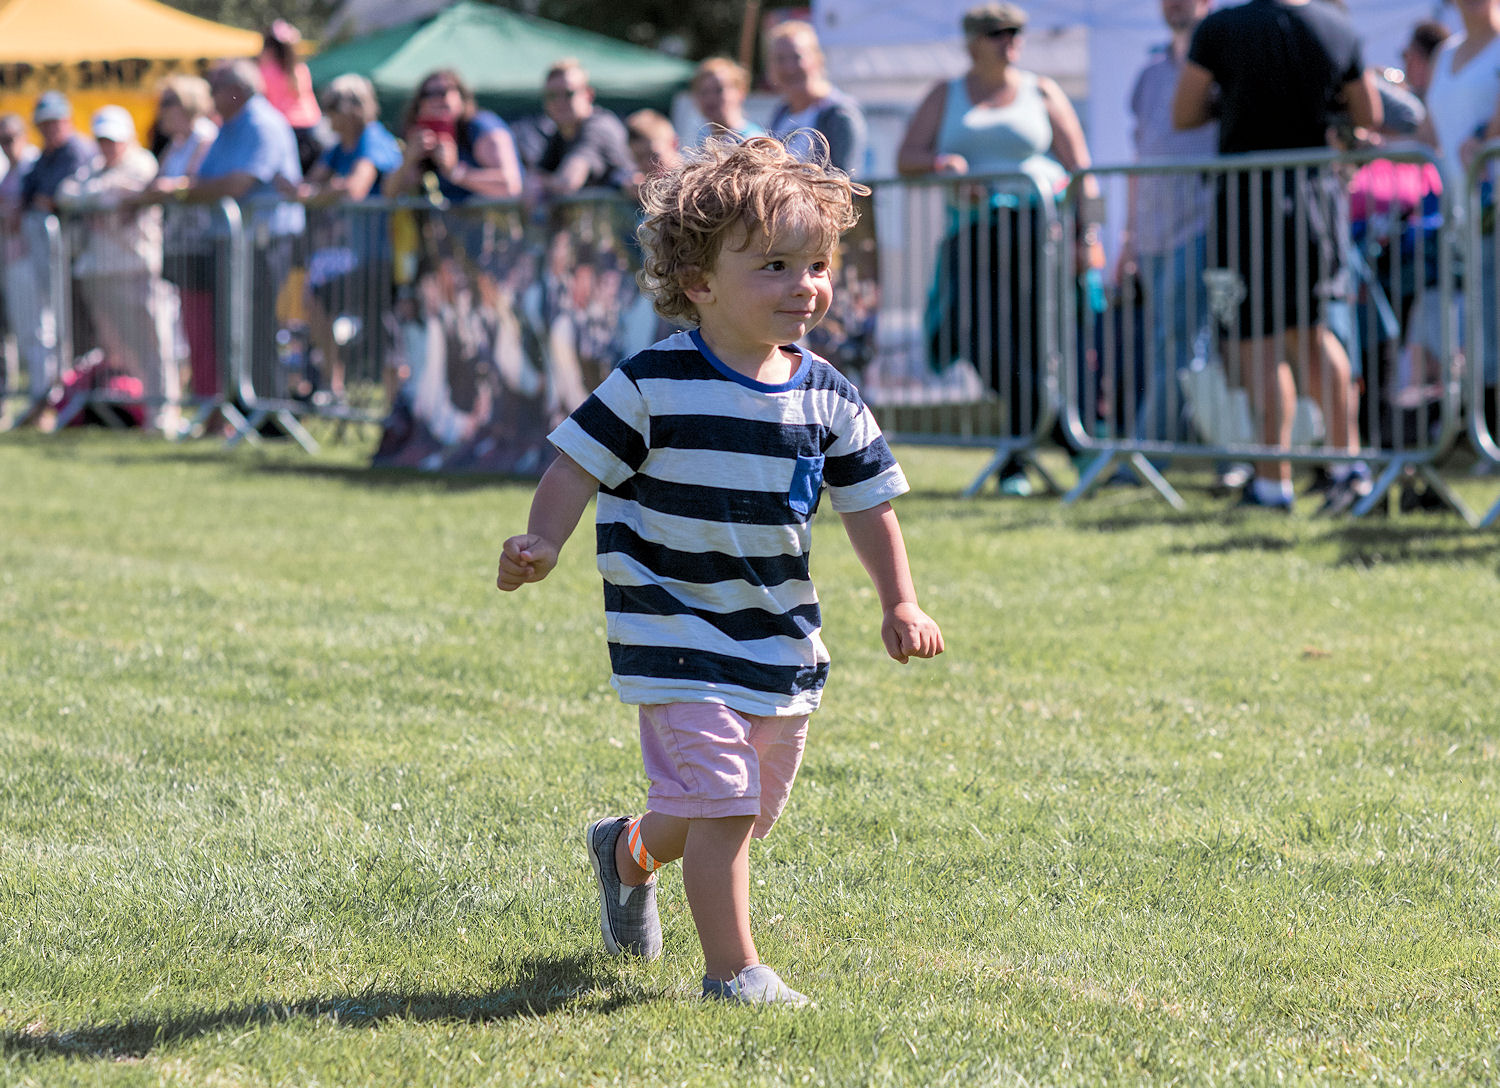 image of Highland Games young boy walking